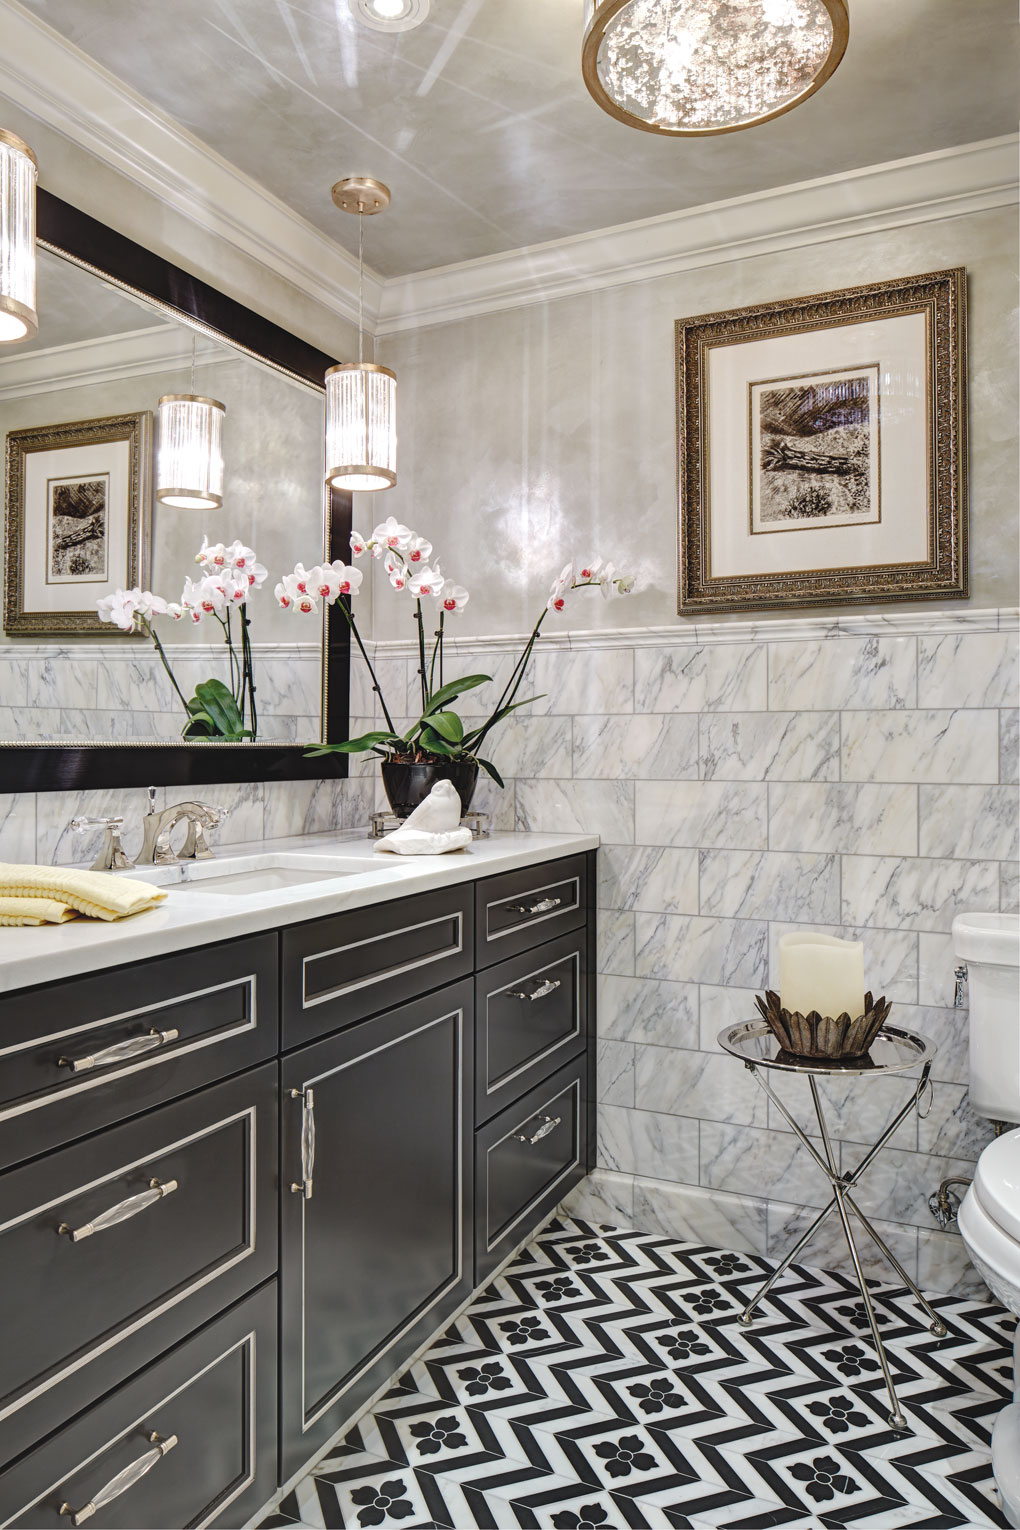 A bathroom with a sophisticated neutral color palette features tiled floor, marble walls, and chandeliers over the vanity.